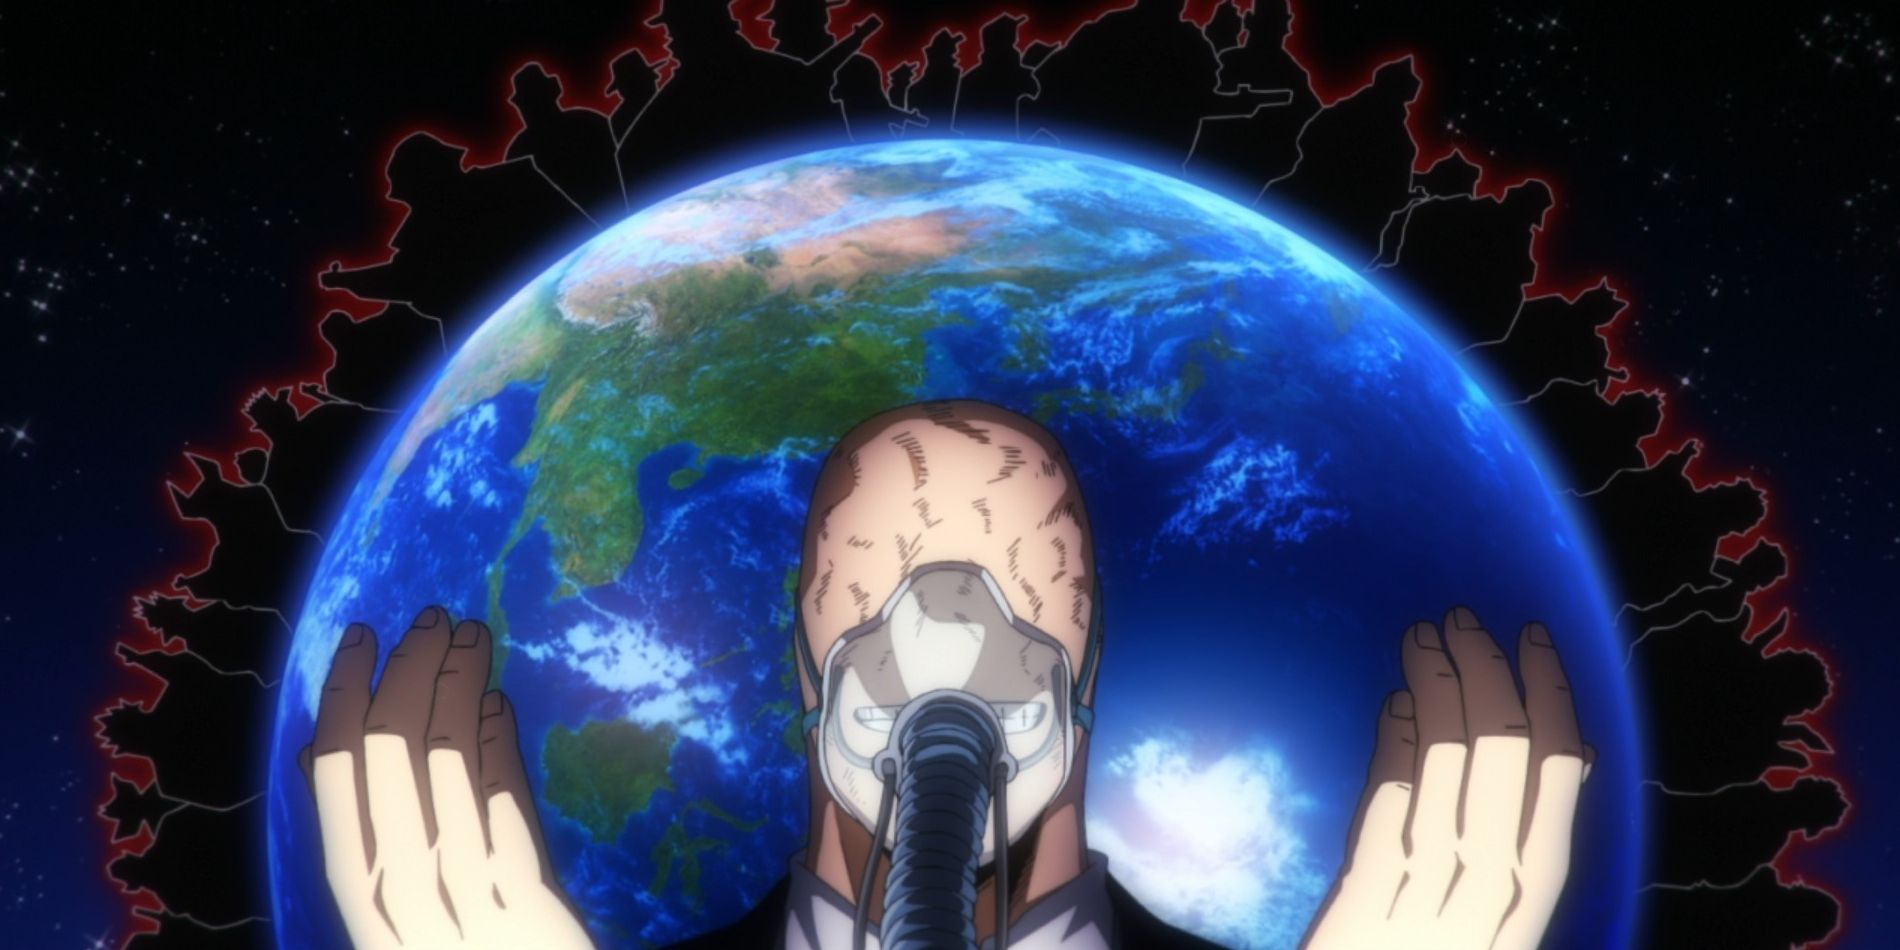 Screenshot from My Hero Academia season 7 episode 139 shows All For One smiling and holding his hands up while wearing an oxygen mask with an image of earth behind him that is surrounded by shadowy figures.